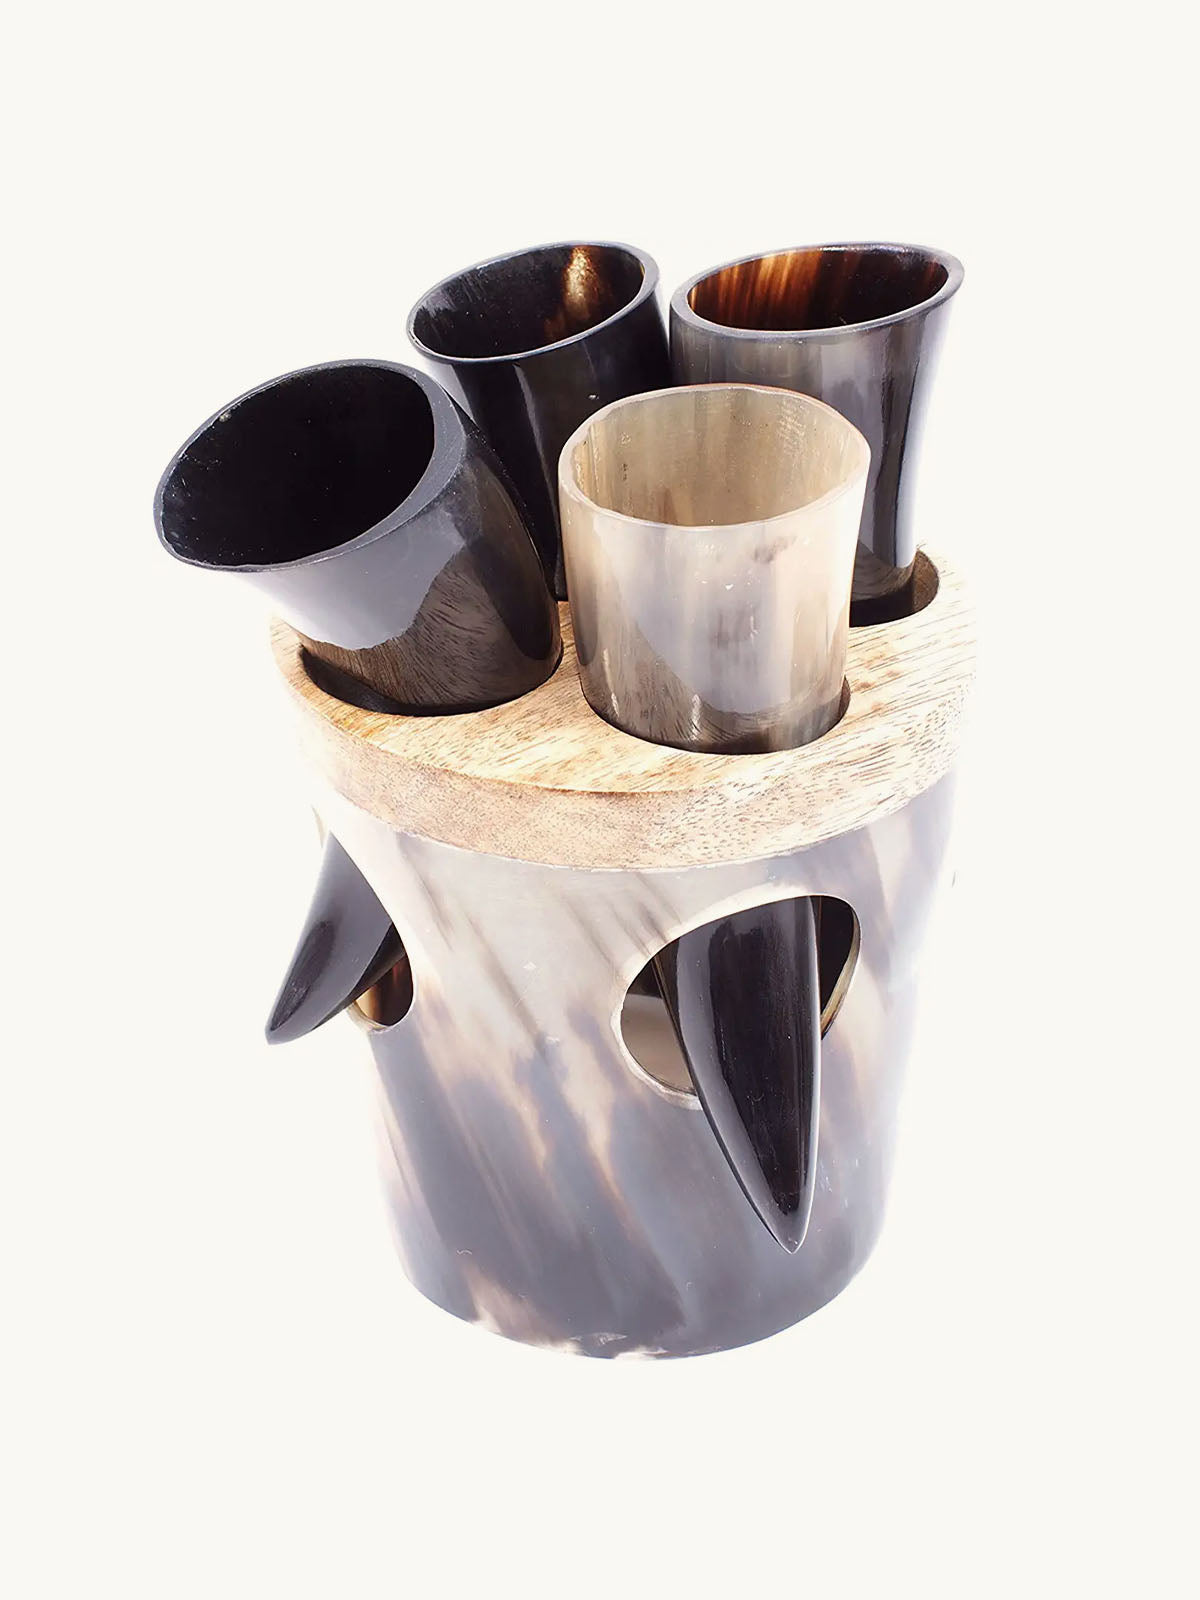 Laniti Viking Drinking Horn Shotglass Medieval Style Genuine Ox Horn - 4 Set Horn Shots with Stand